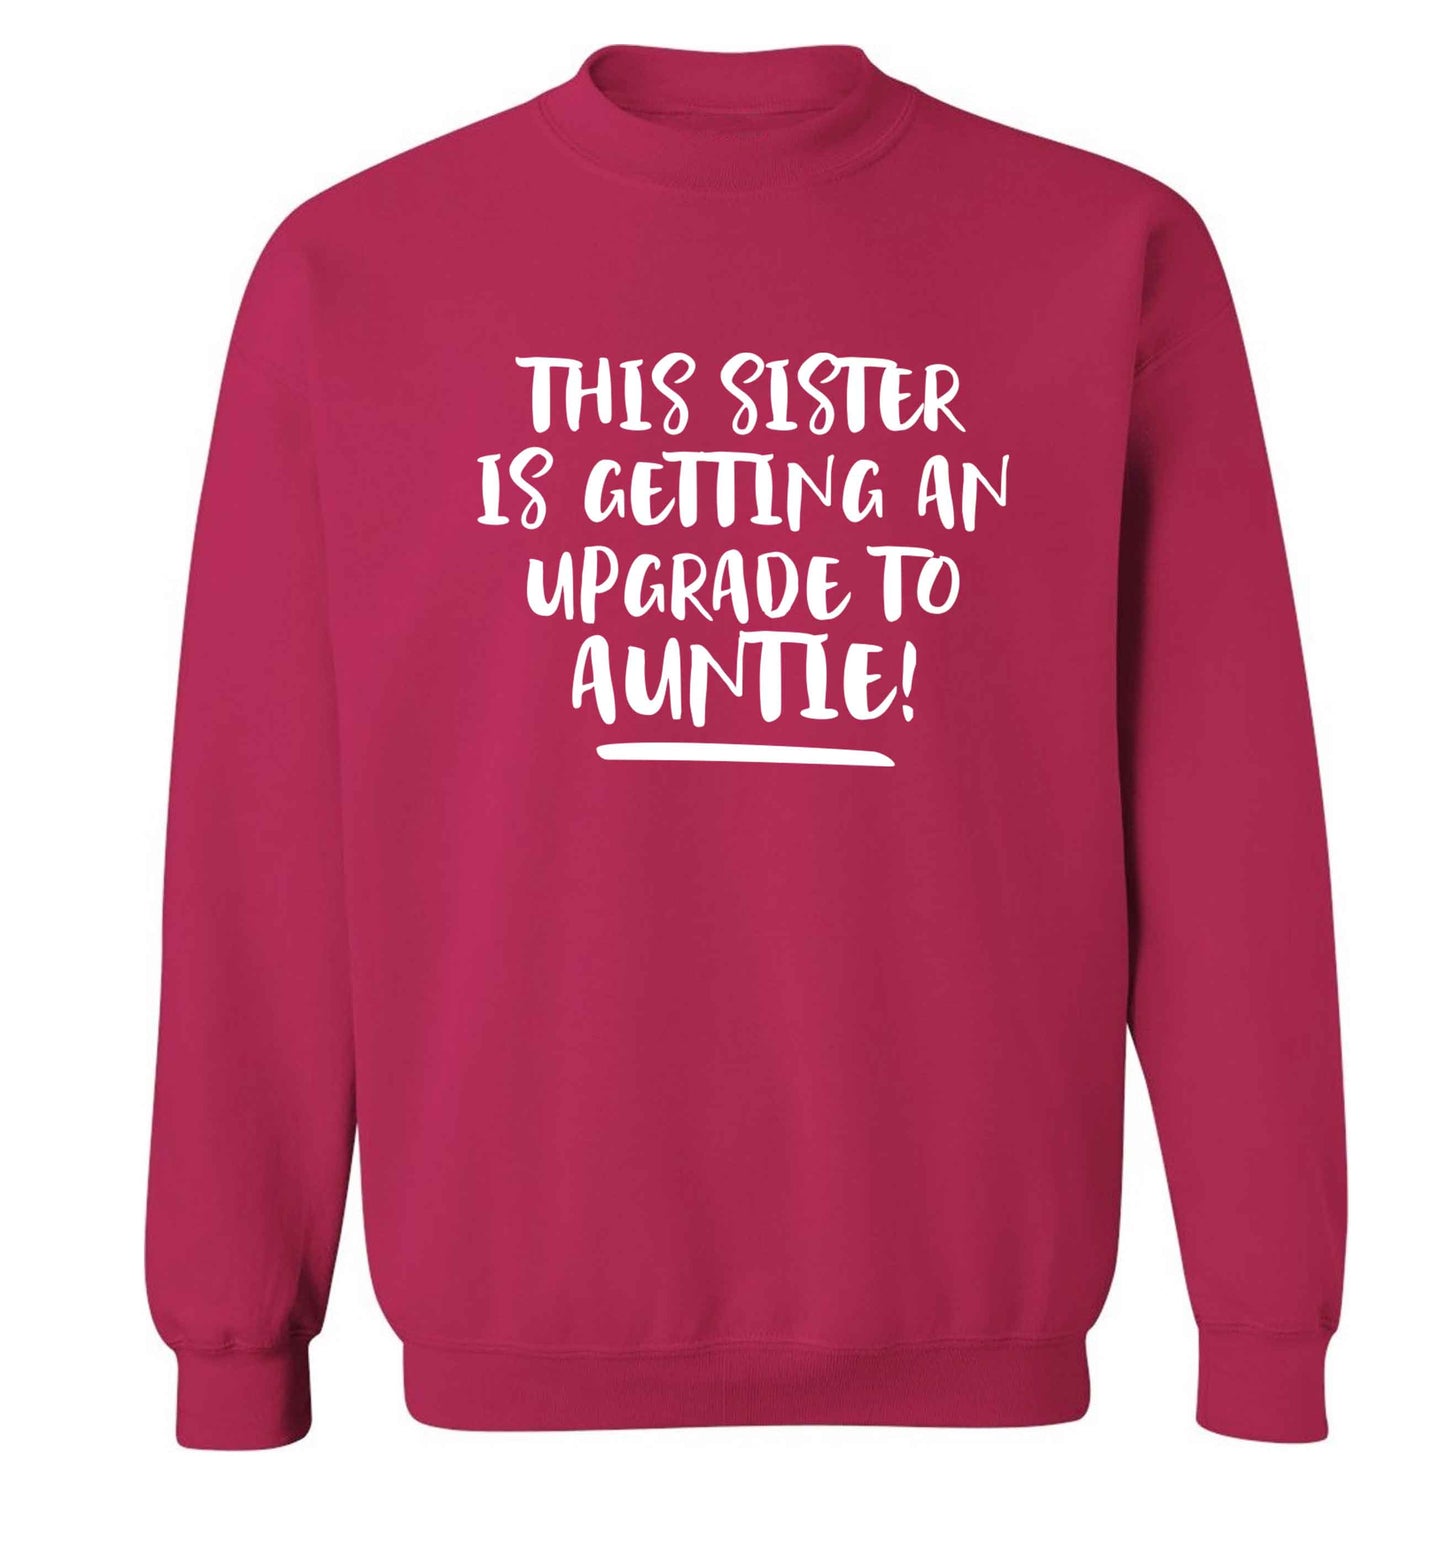 This sister is getting an upgrade to auntie! Adult's unisex pink Sweater 2XL